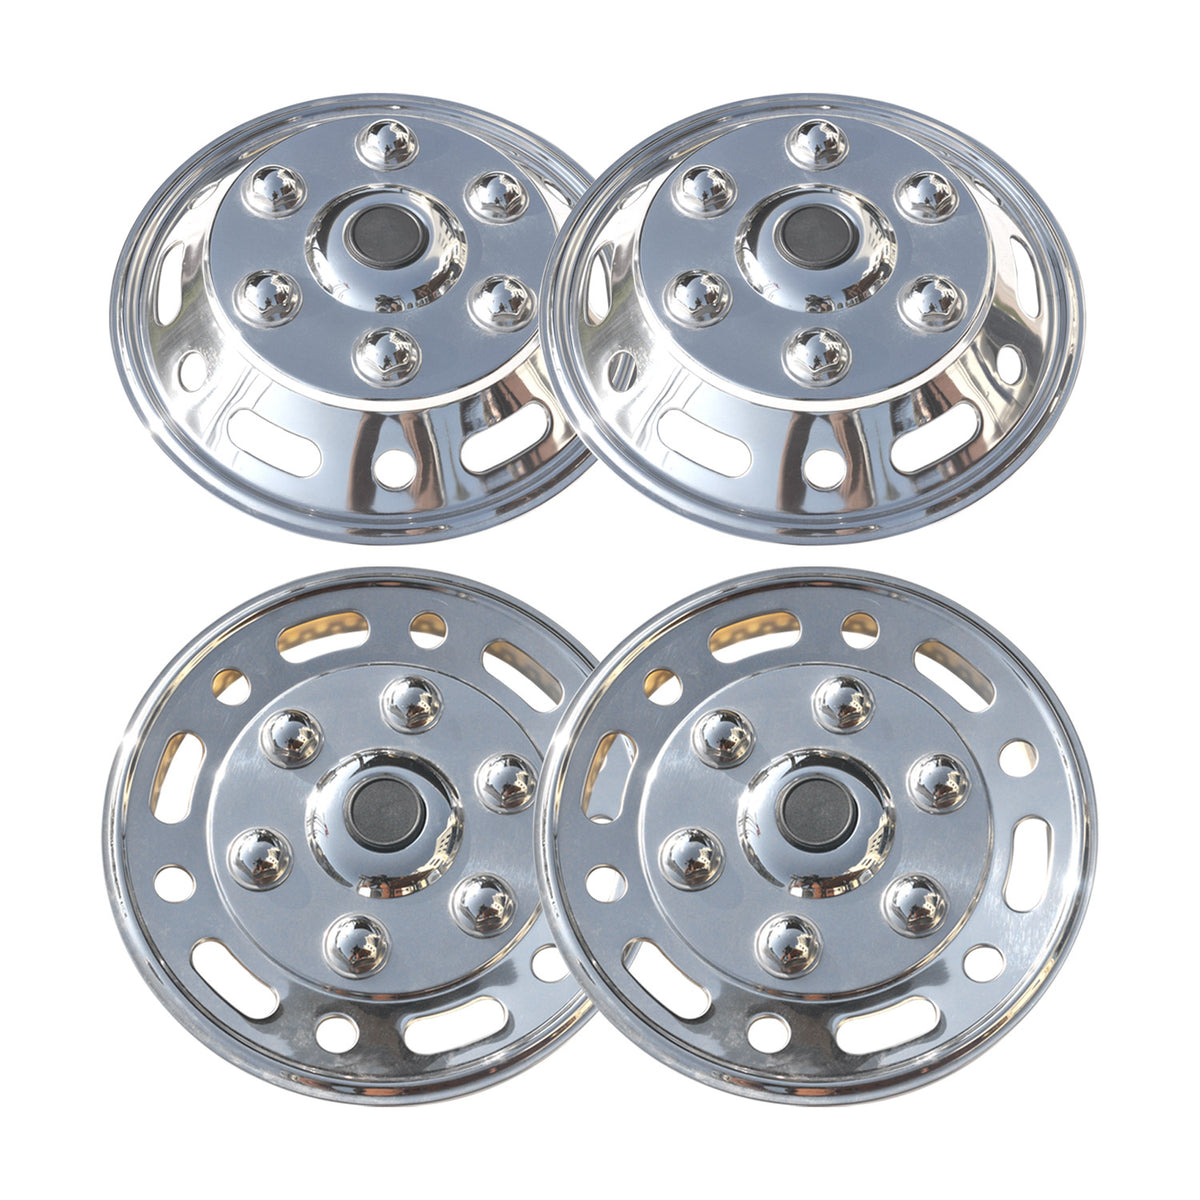 4x hubcaps wheel covers wheel covers 16" for Ford steel silver